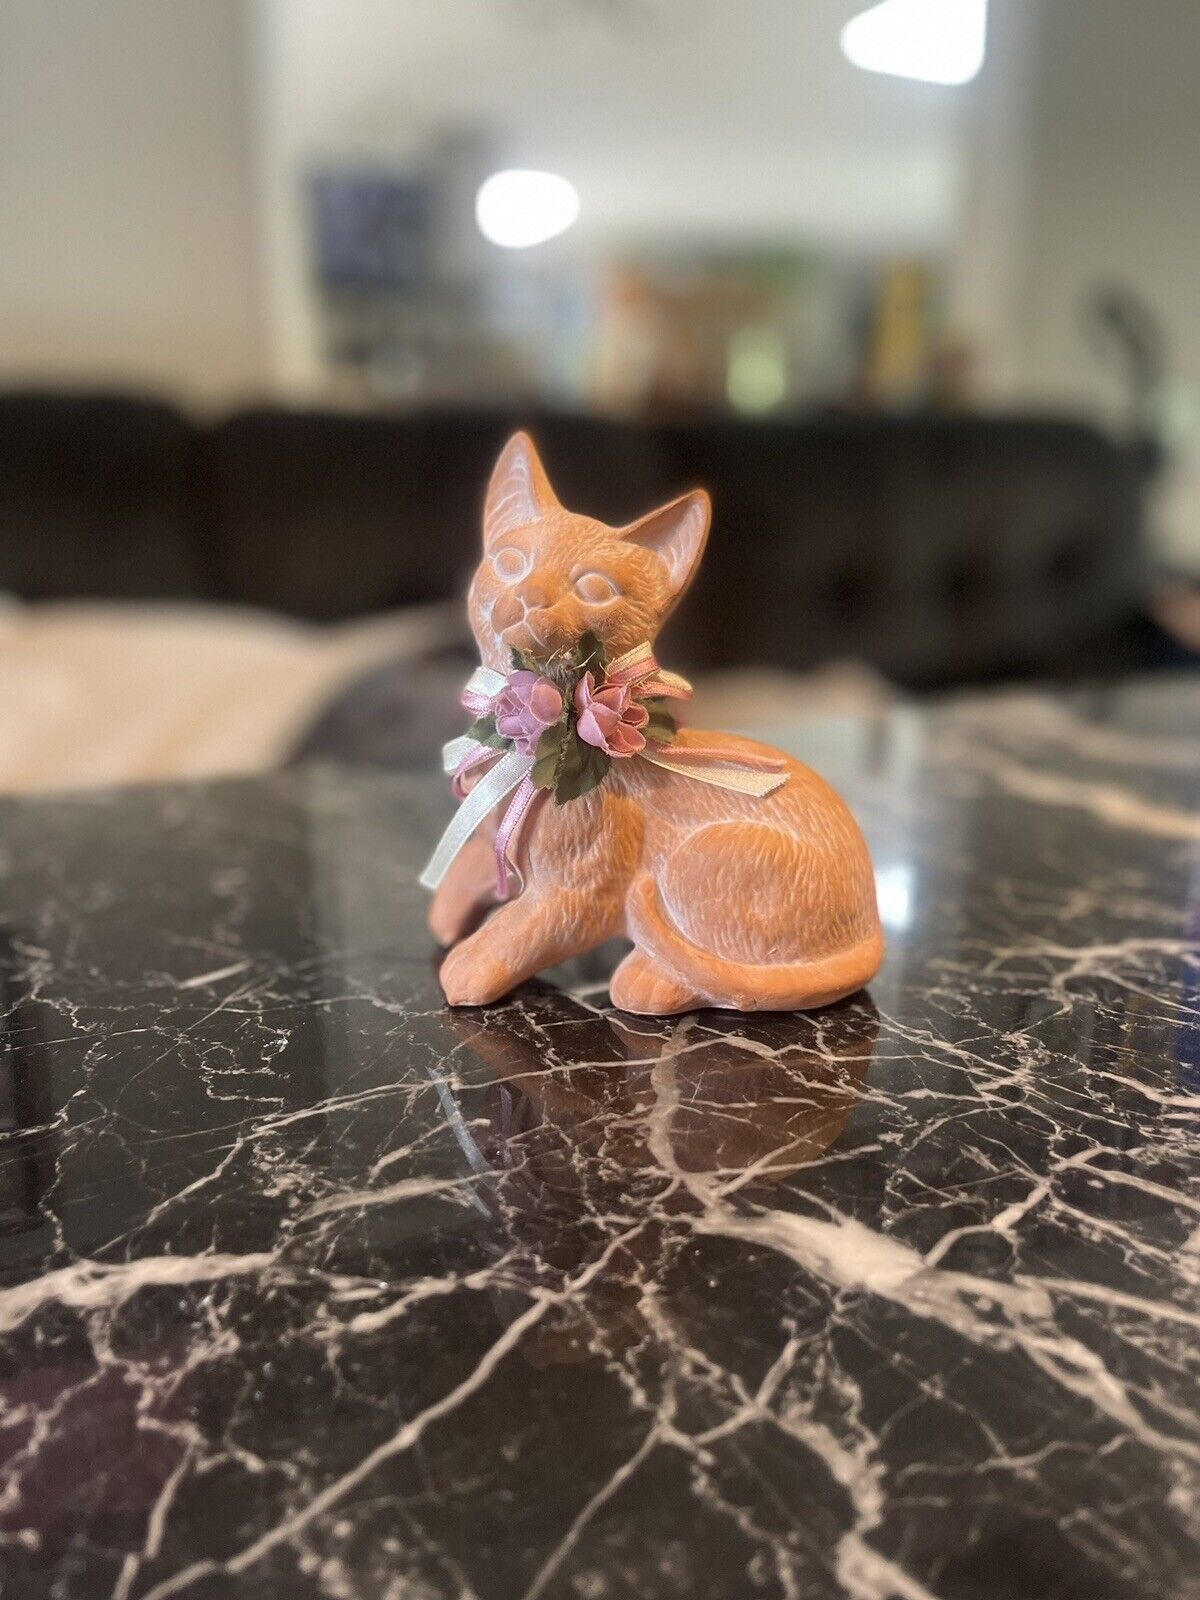 Vintage Porcelain Cat Figurine With Flower Bow 5.25” Tall